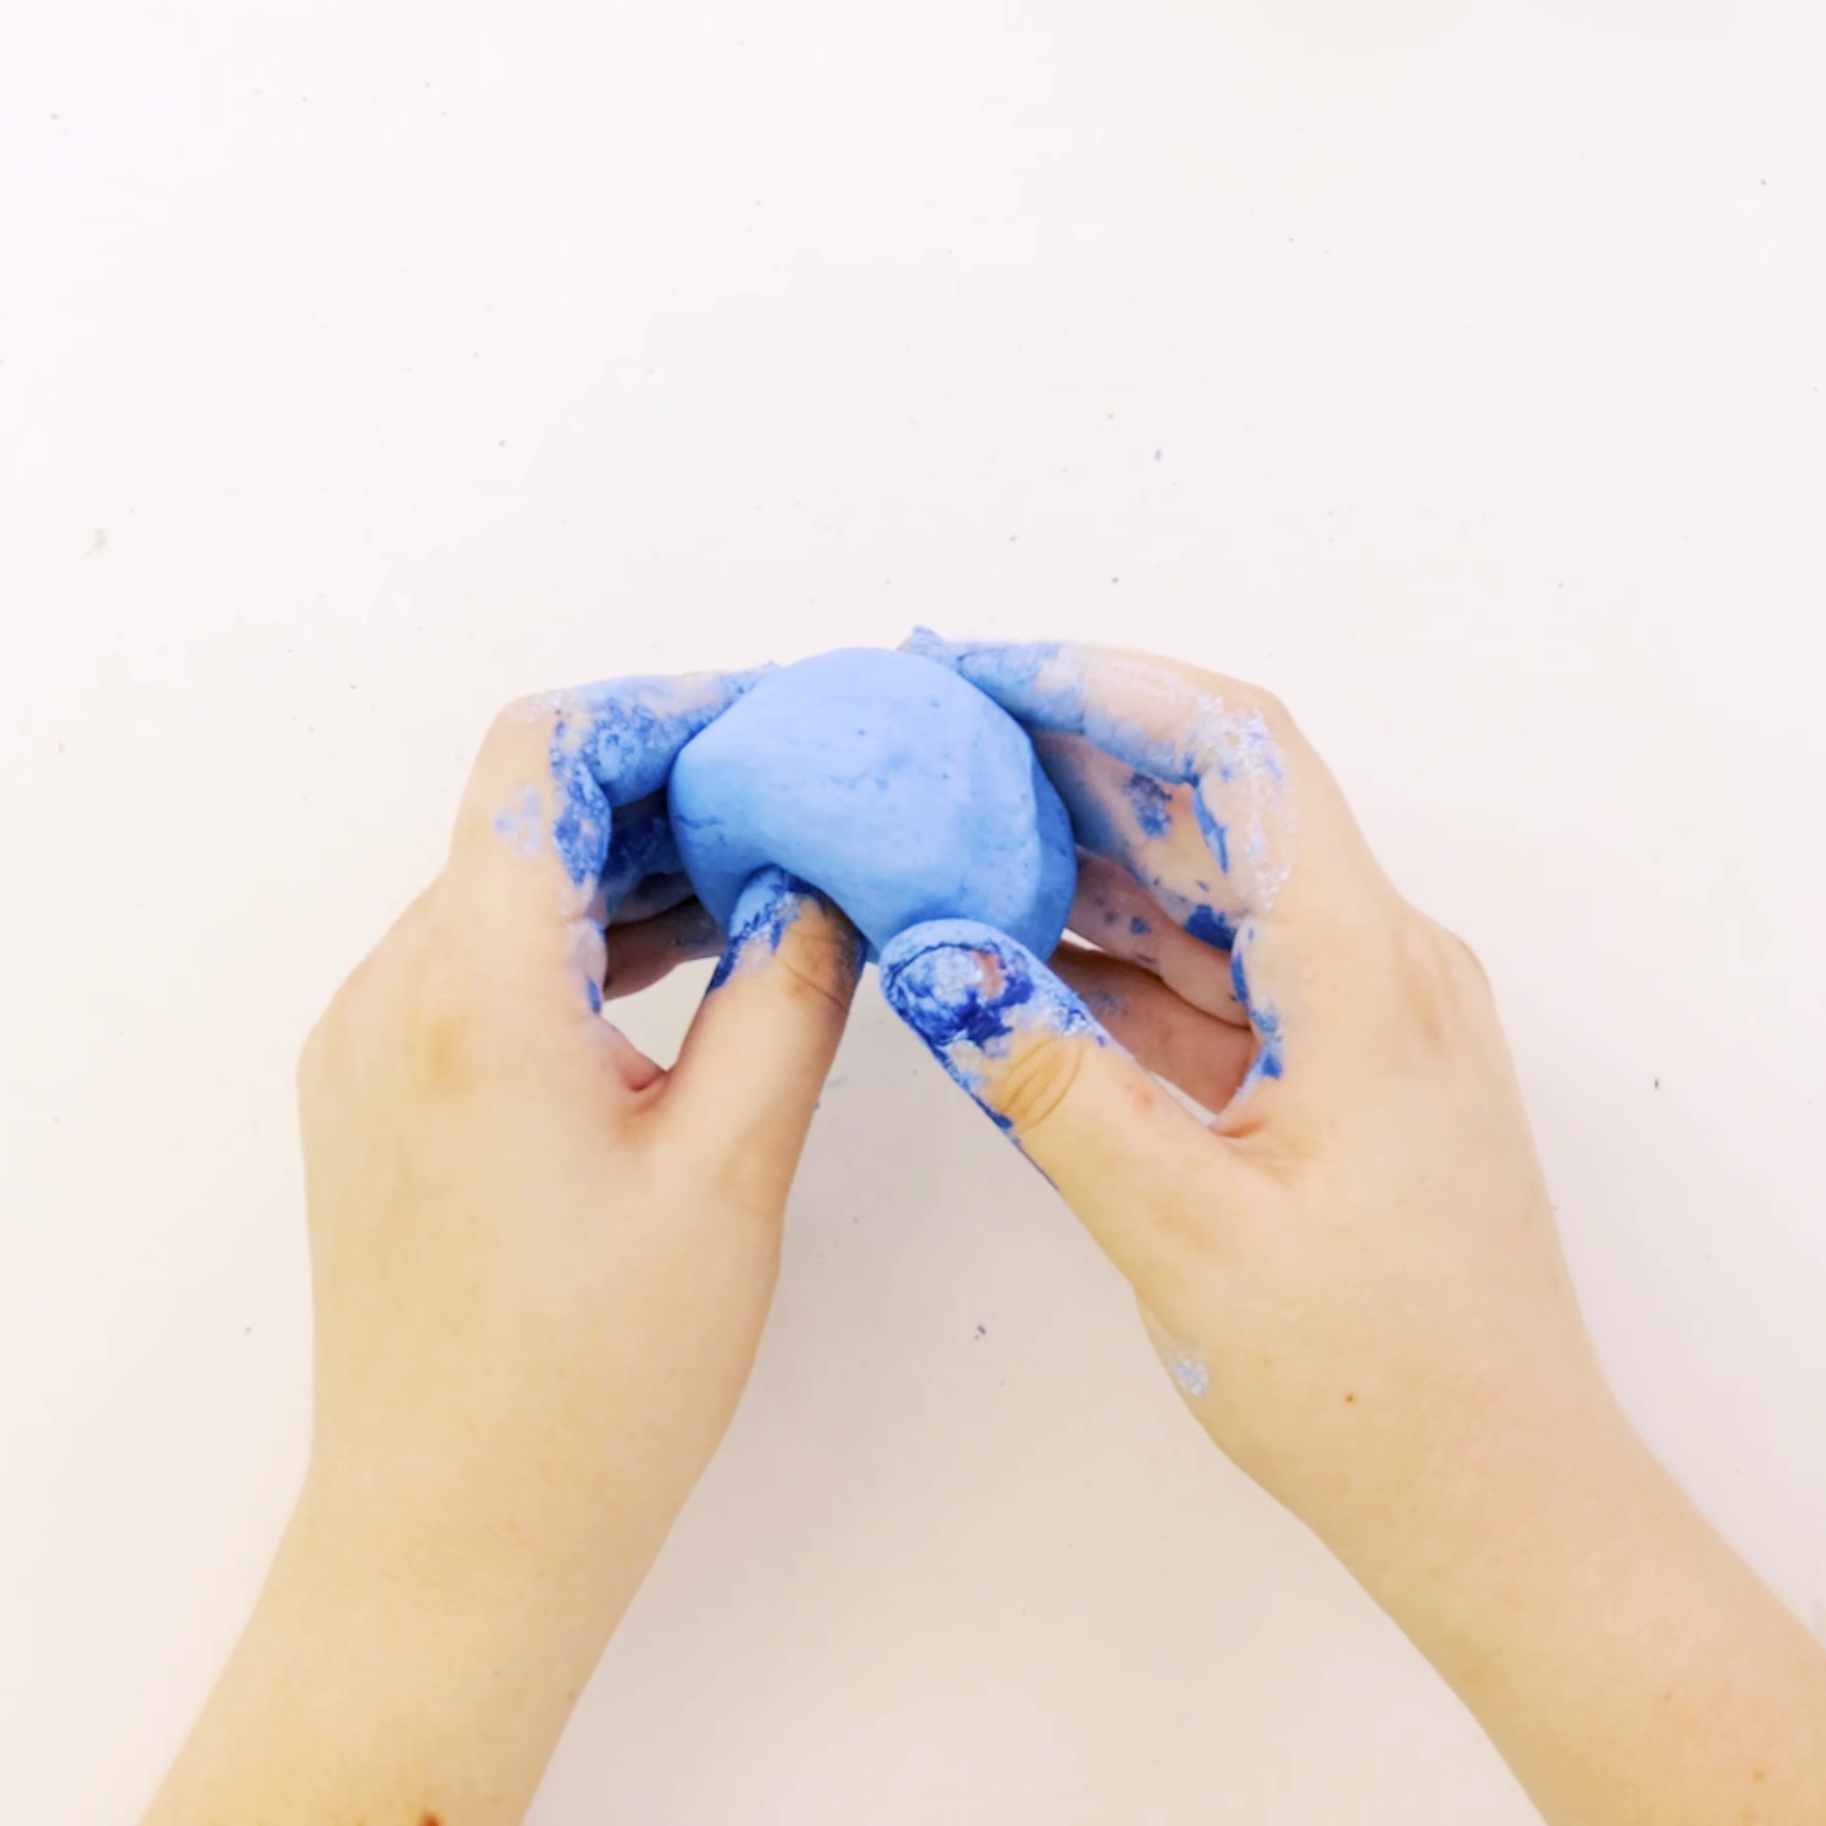 4. Blue acrylic paint mixed into white air hardening clay